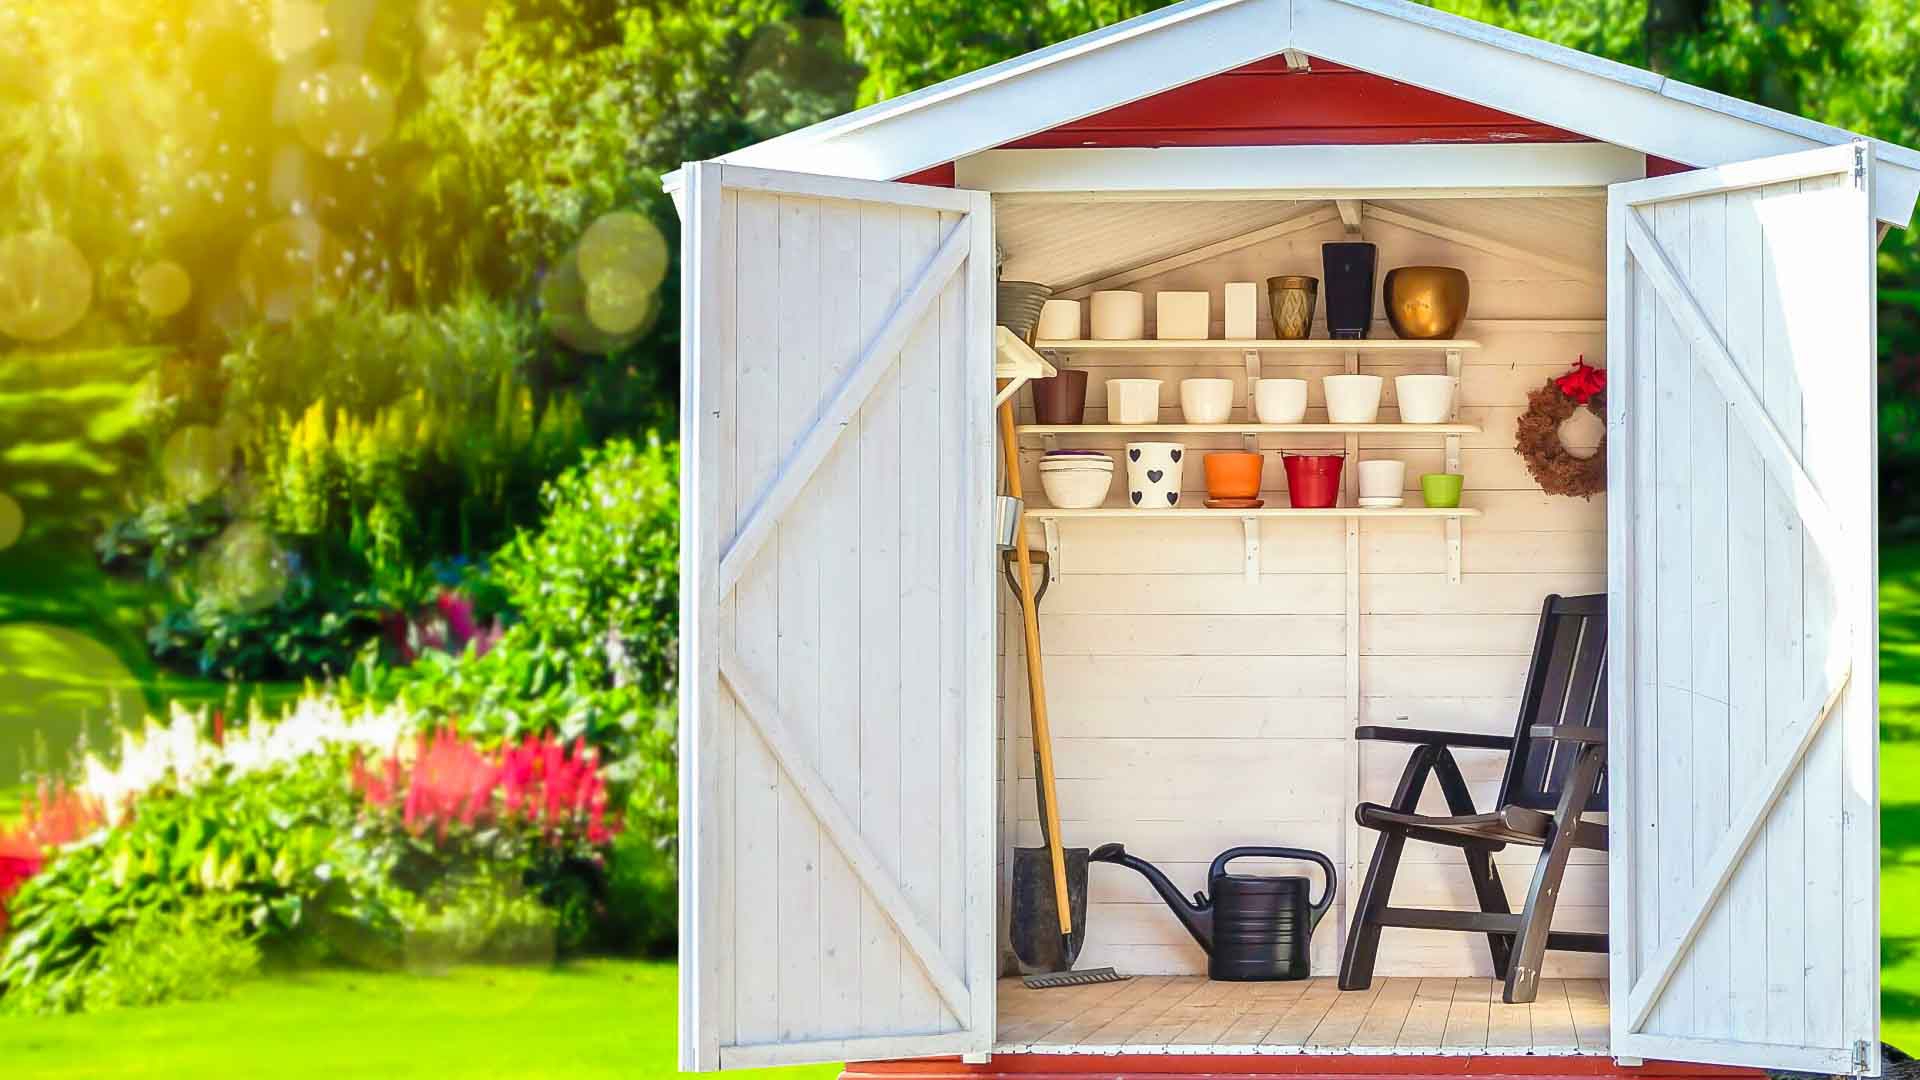 Sun Rise Sheds | 6 Tips To Help Maximize Your Shed Storage Space